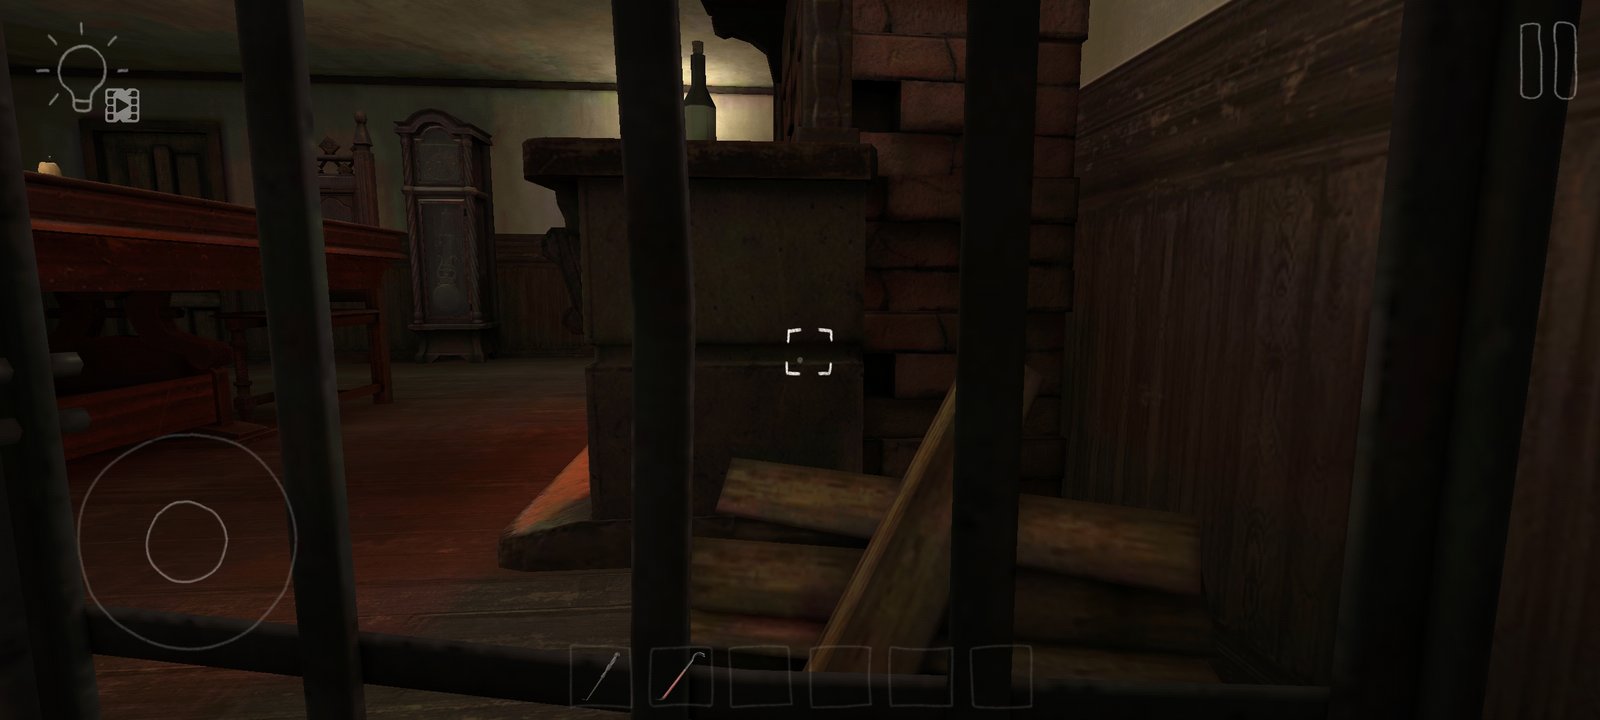 Eyes Horror & Coop Multiplayer v7.0.64 MOD APK -  - Android &  iOS MODs, Mobile Games & Apps